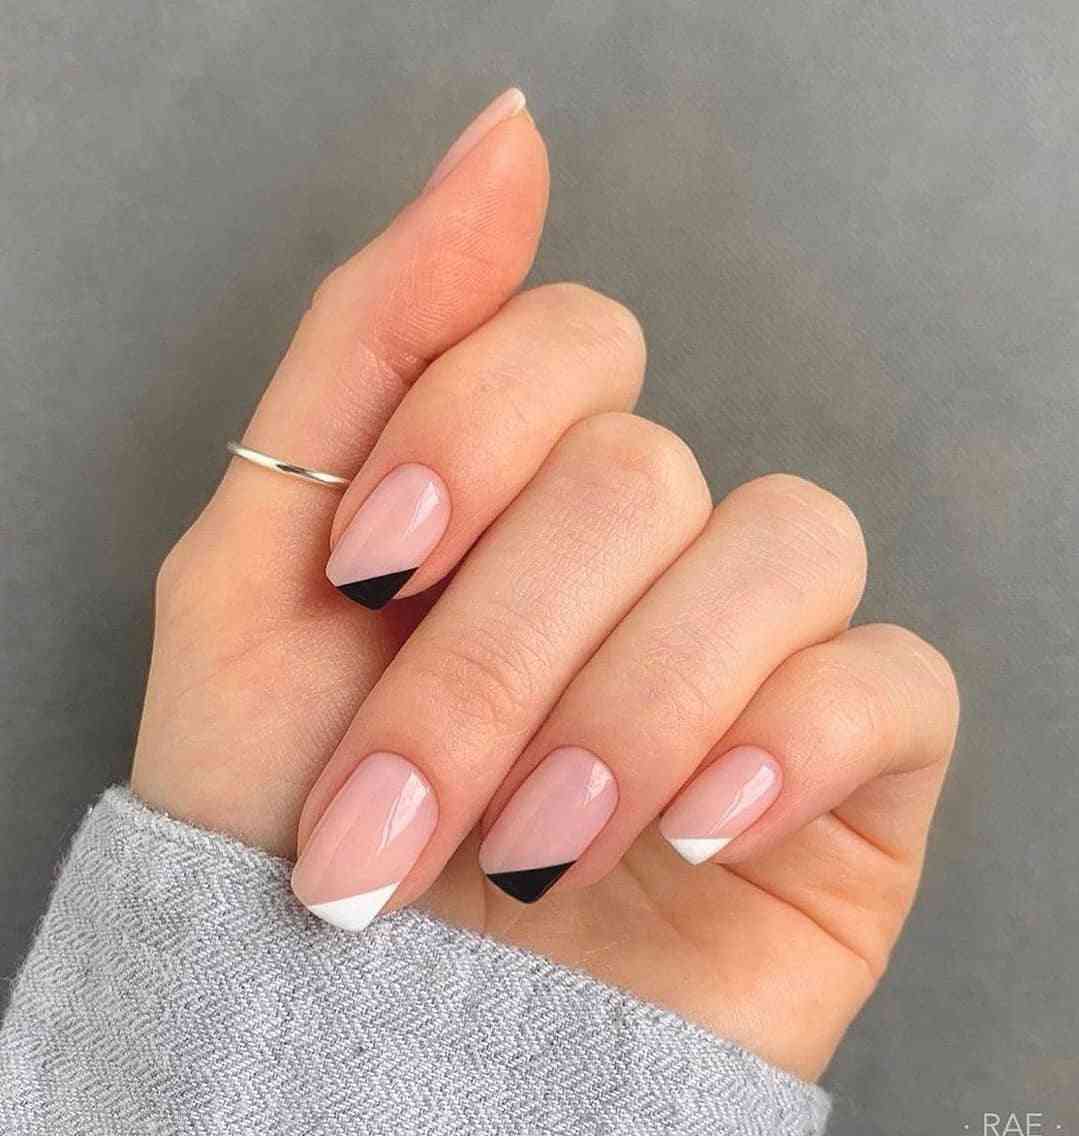 50+ Beautiful Summer Nail Designs For Women In 2021 images 17